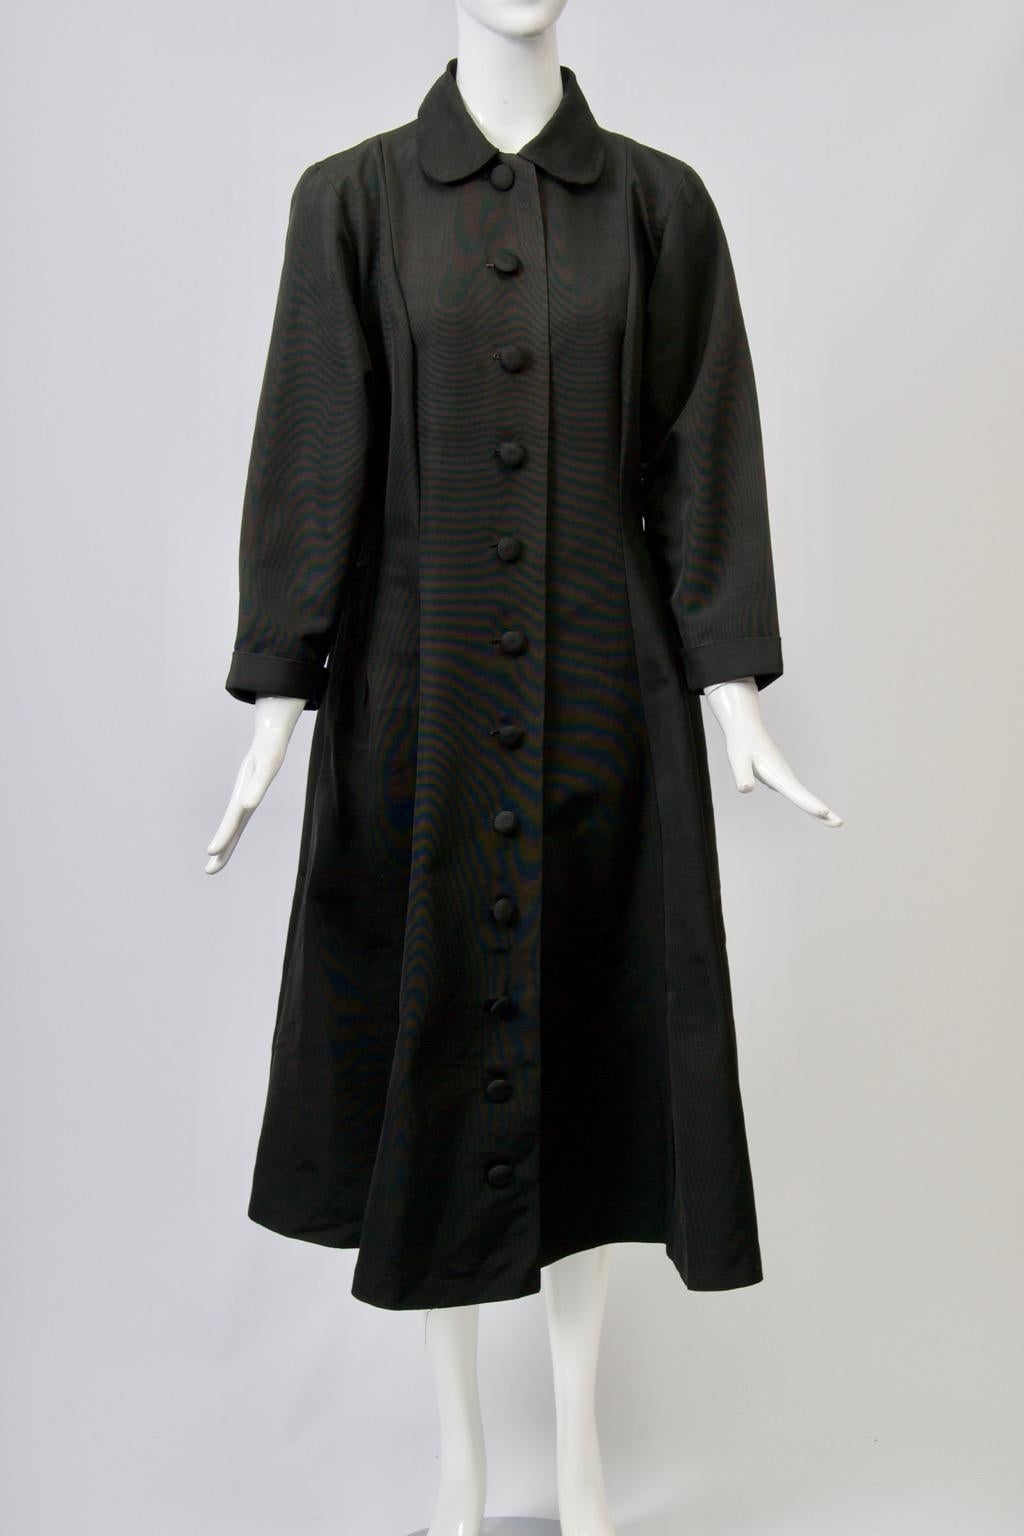 Vintage black faille princess-style coat with peter pan collar and self buttons from neck to hem. Set-in sleeves with deep armholes. Vertical seaming shapes the fitted waist and flare skirt. Hidden side slit pockets. Unlined.
Approximate